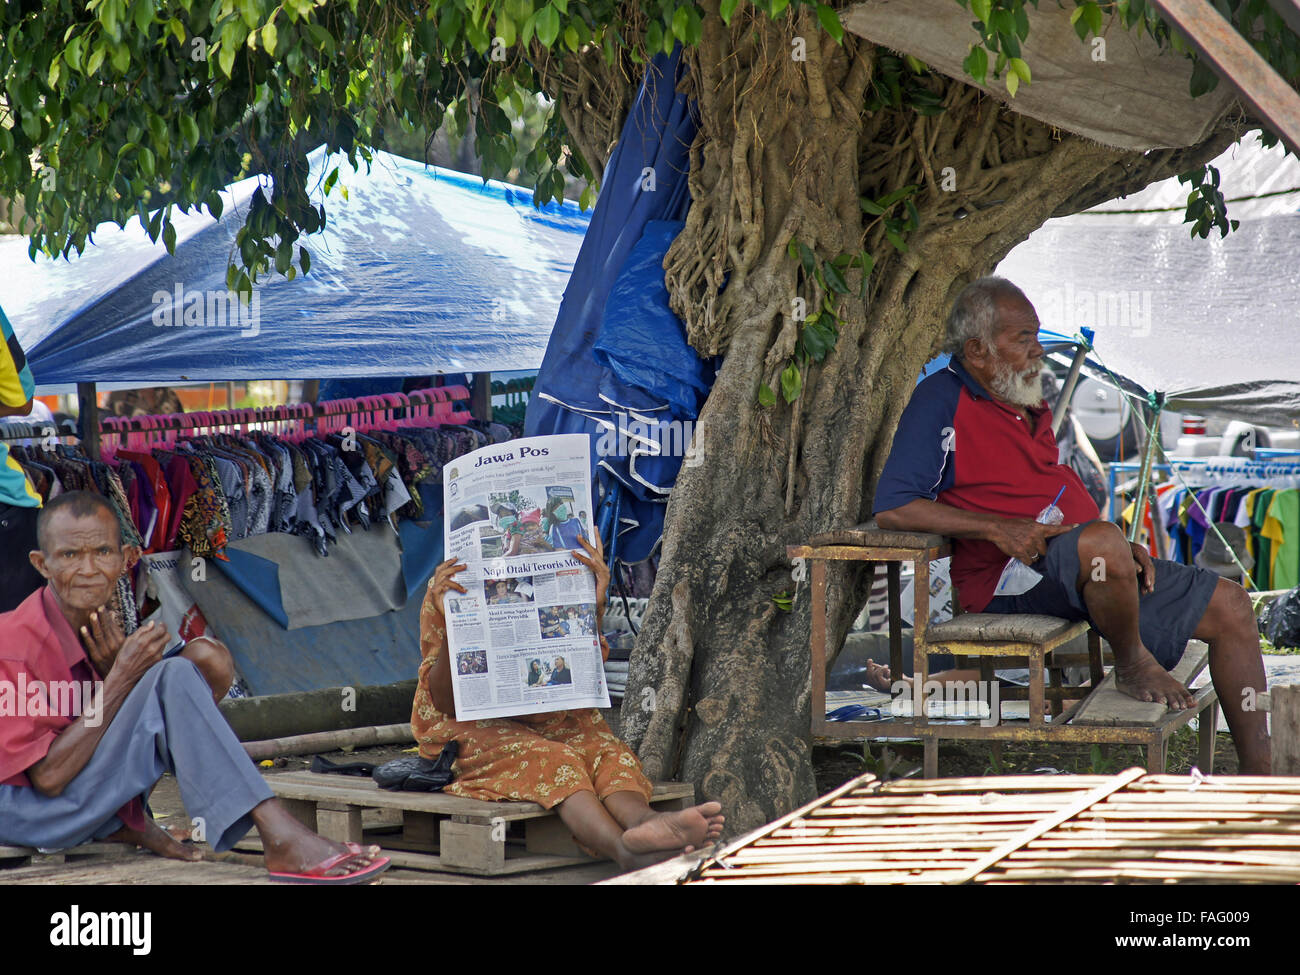 Sitting reading the newspaper in the shade Stock Photo